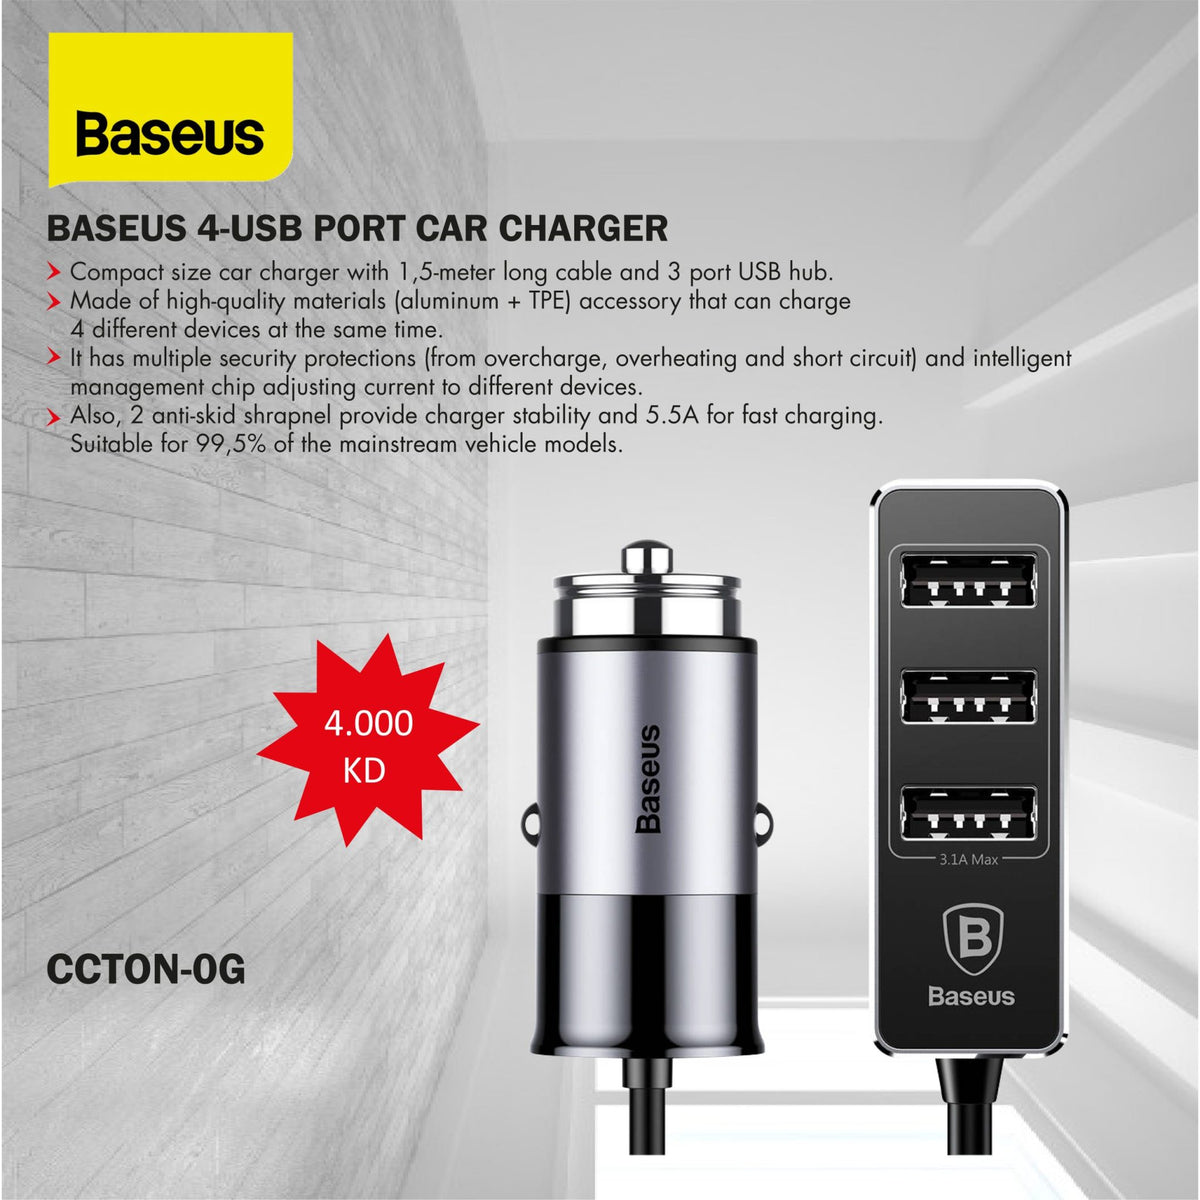 Baseus Enjoy Together with 1.5m Extension Cable 4X USB 5.5A Output Patulous Car, Cellular Phone Charger Dark Gray CCTON-0G